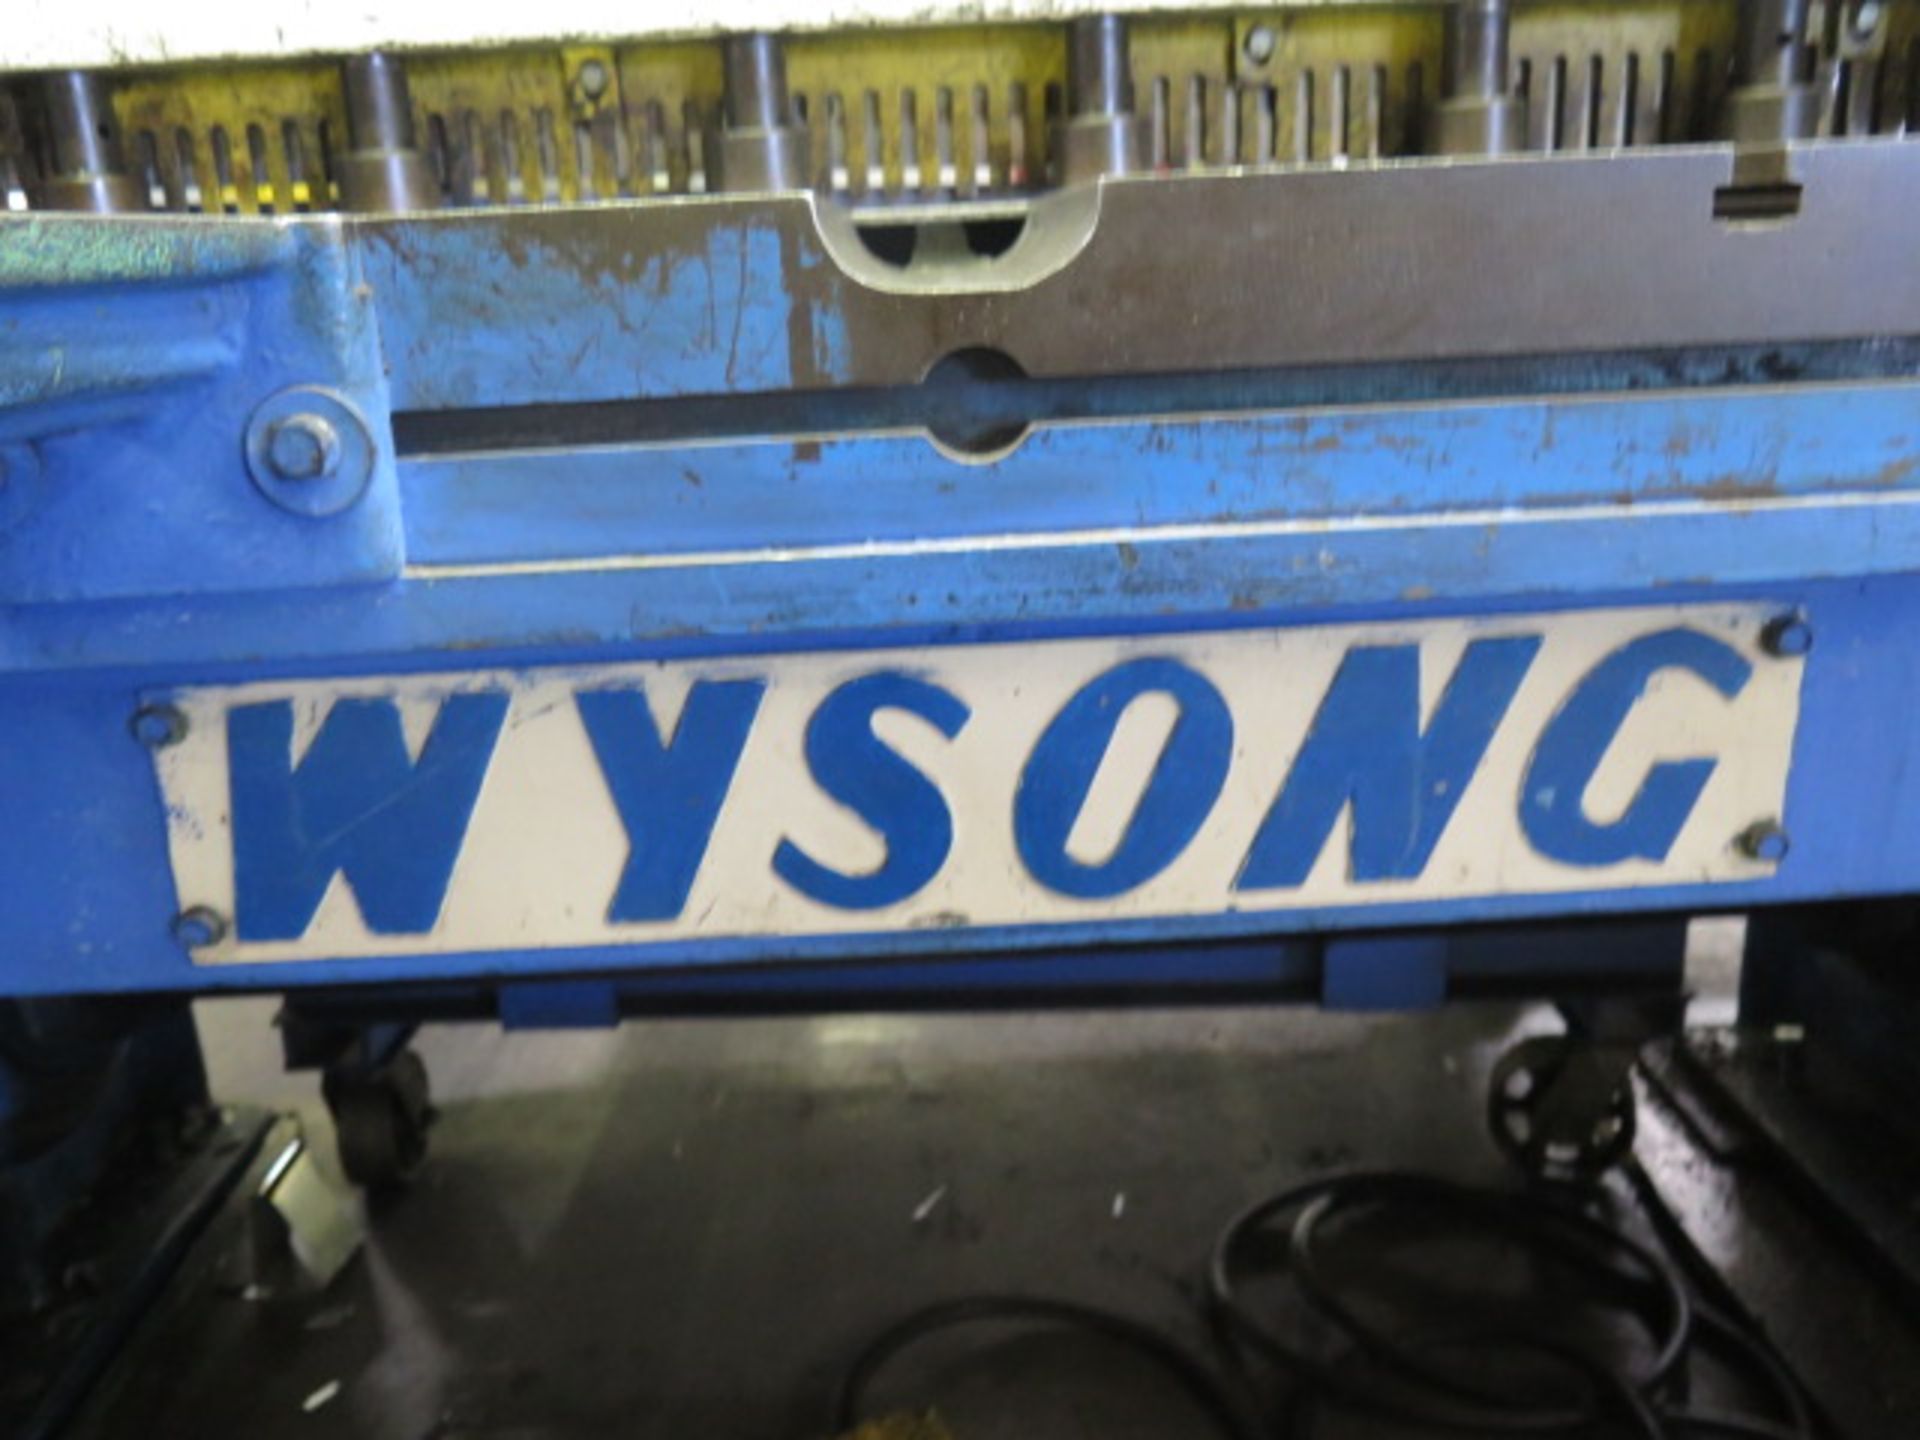 Wysong mdl. 1252 12GA x 52" Power Shear s/n P13-1313 w/ Dial Back Gauge, 58" Squaring Arm, Front Sup - Image 9 of 10